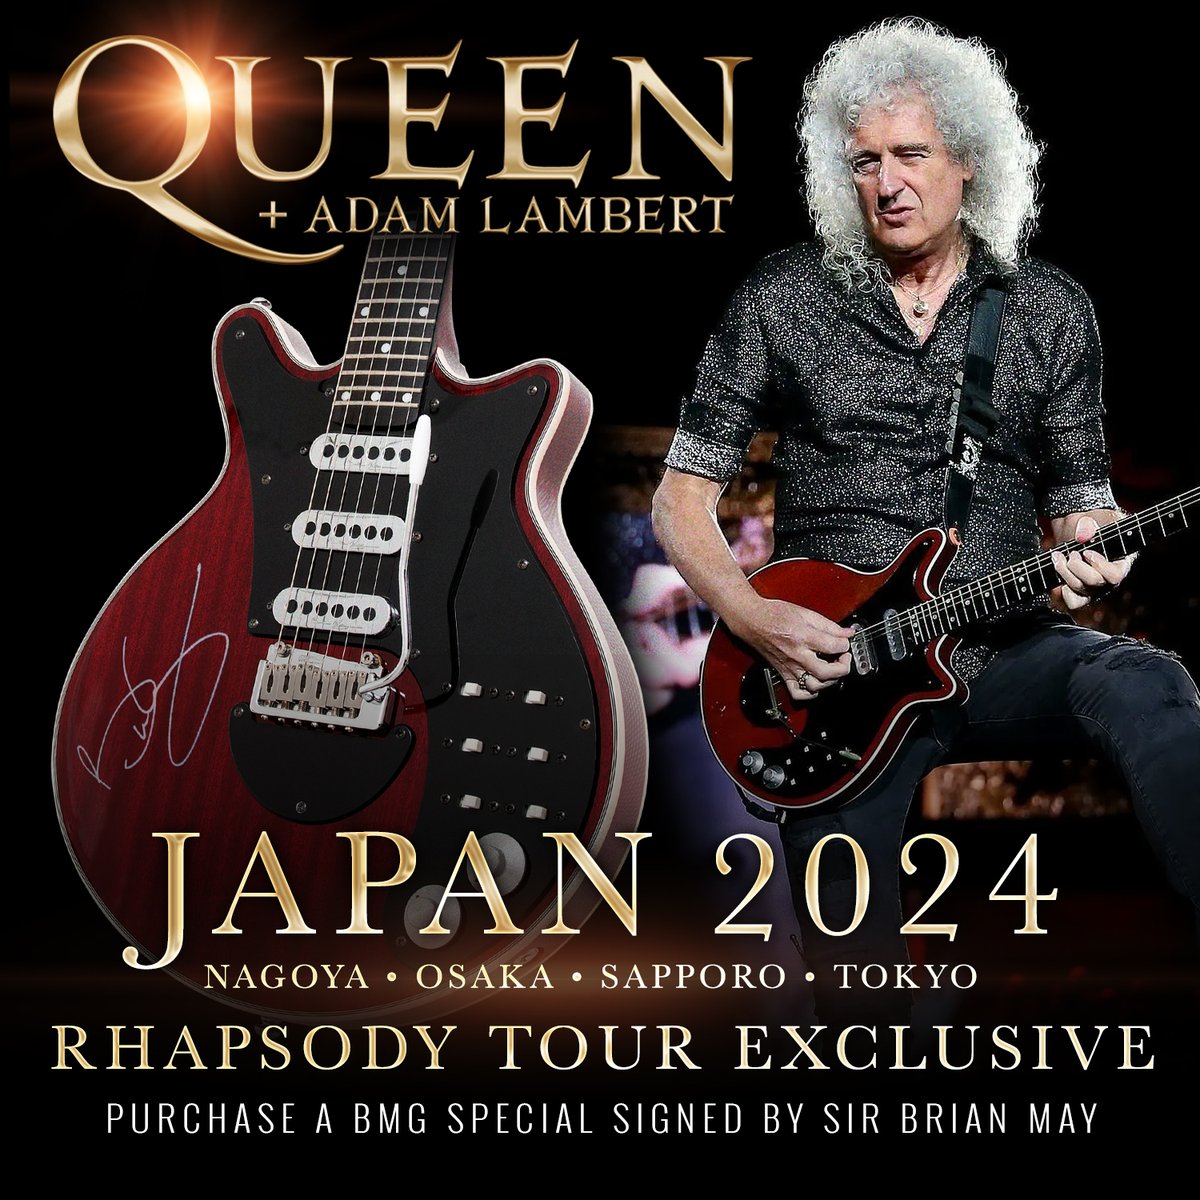 Celebrating @QueenWillRock+@AdamLambert's triumphant return to Japan, @BrianMayGuitars and @DrBrianMay have teamed up once again to offer fans an exclusive opportunity to get their hands on a unique, autographed collector's item. Head to BrianMayGuitars.co.uk for full details.